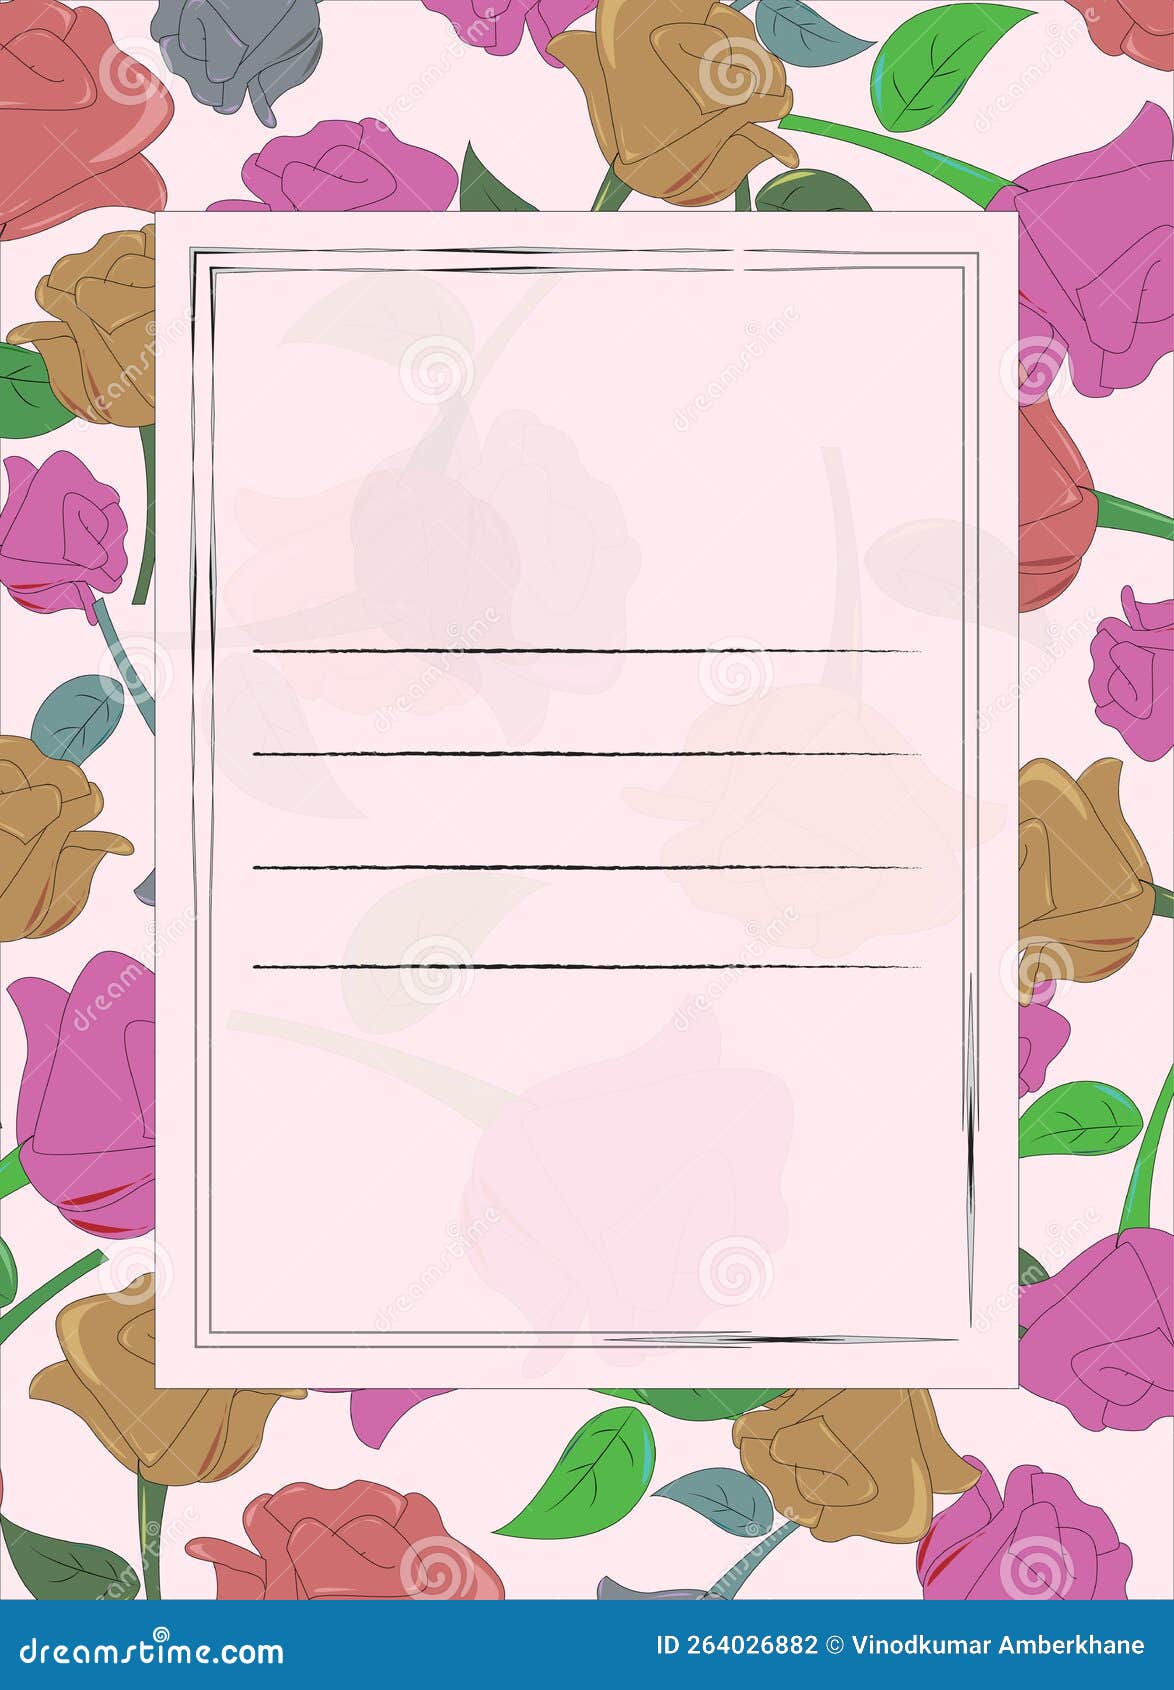  of letter, diary, weekly, notes paper . fuzzy wuzzy, super pink, camel, roman silver color rose on background.